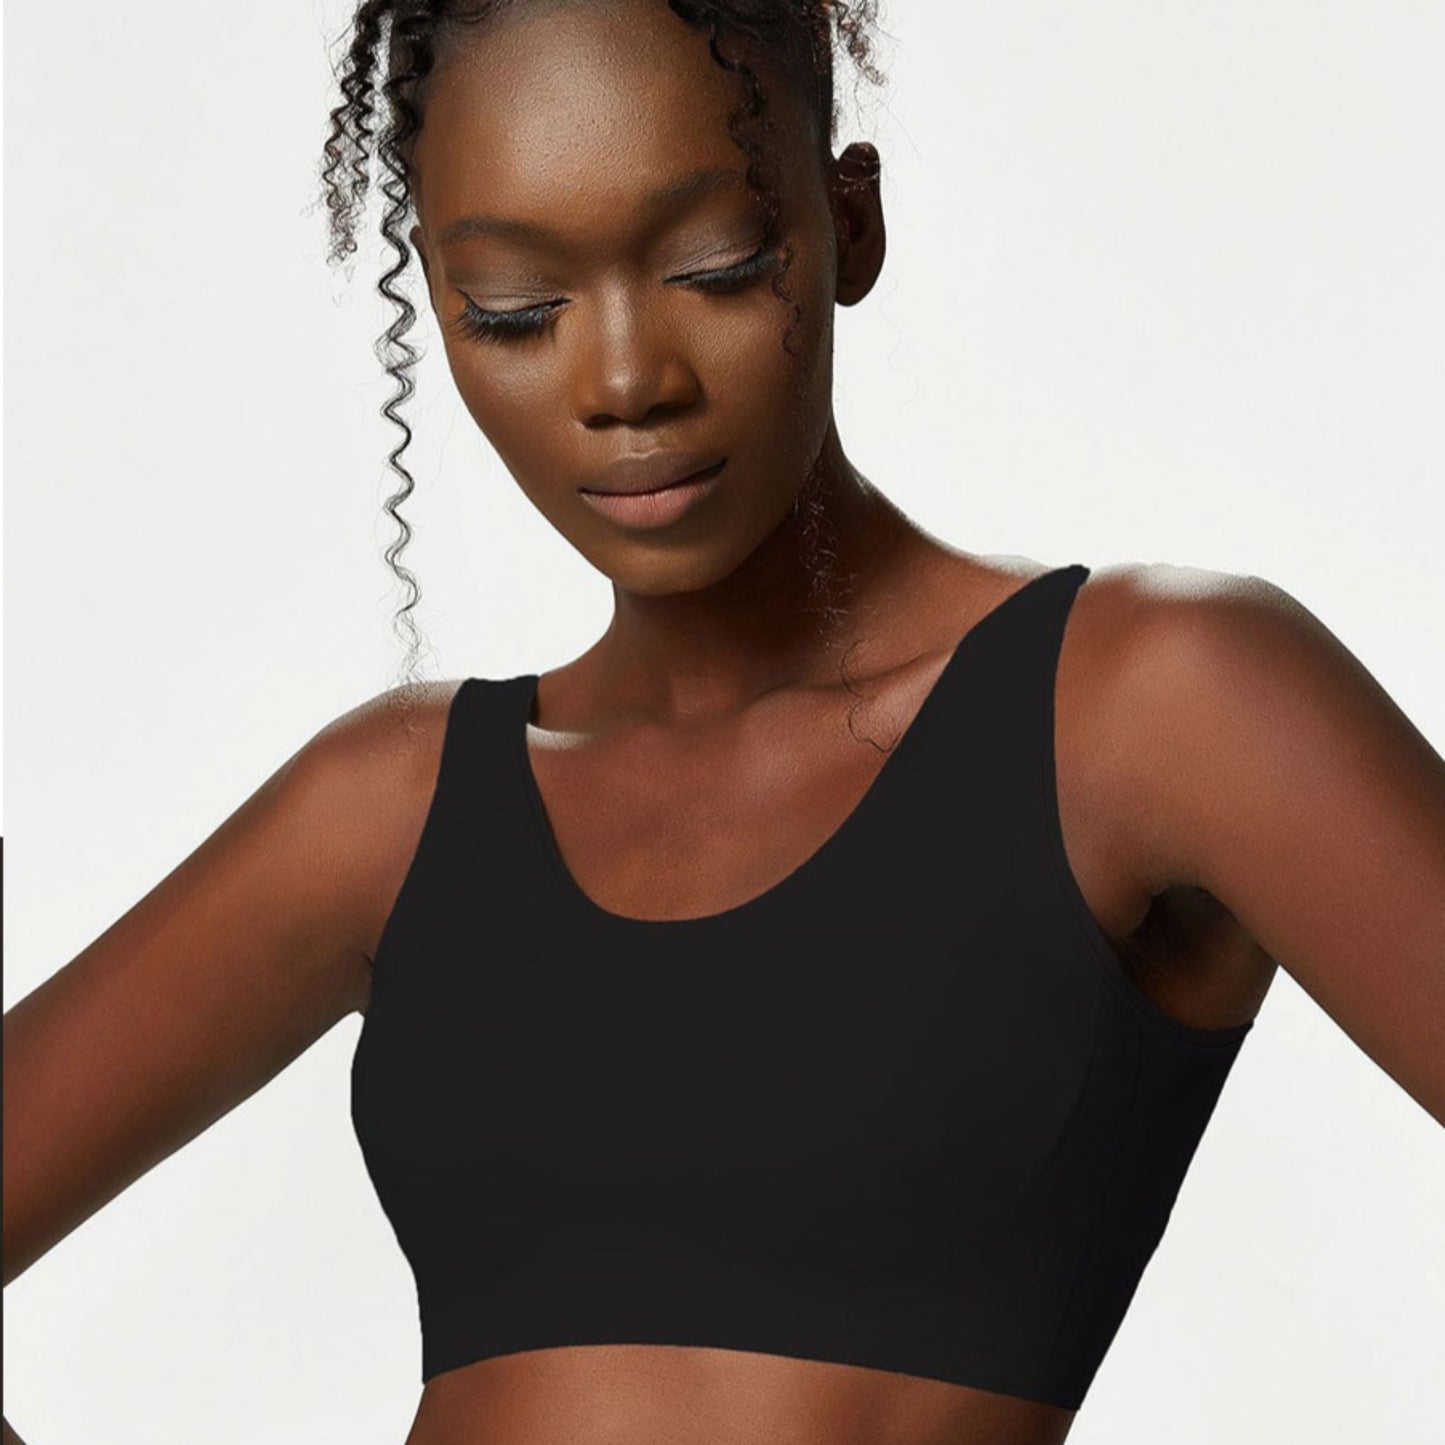 MODEL WEARING A LIGHTWEIGHT, SUPPORTIVE AND COMFORTABLE SPORTS BRA FROM VIBRAS ACTIVEWEAR.